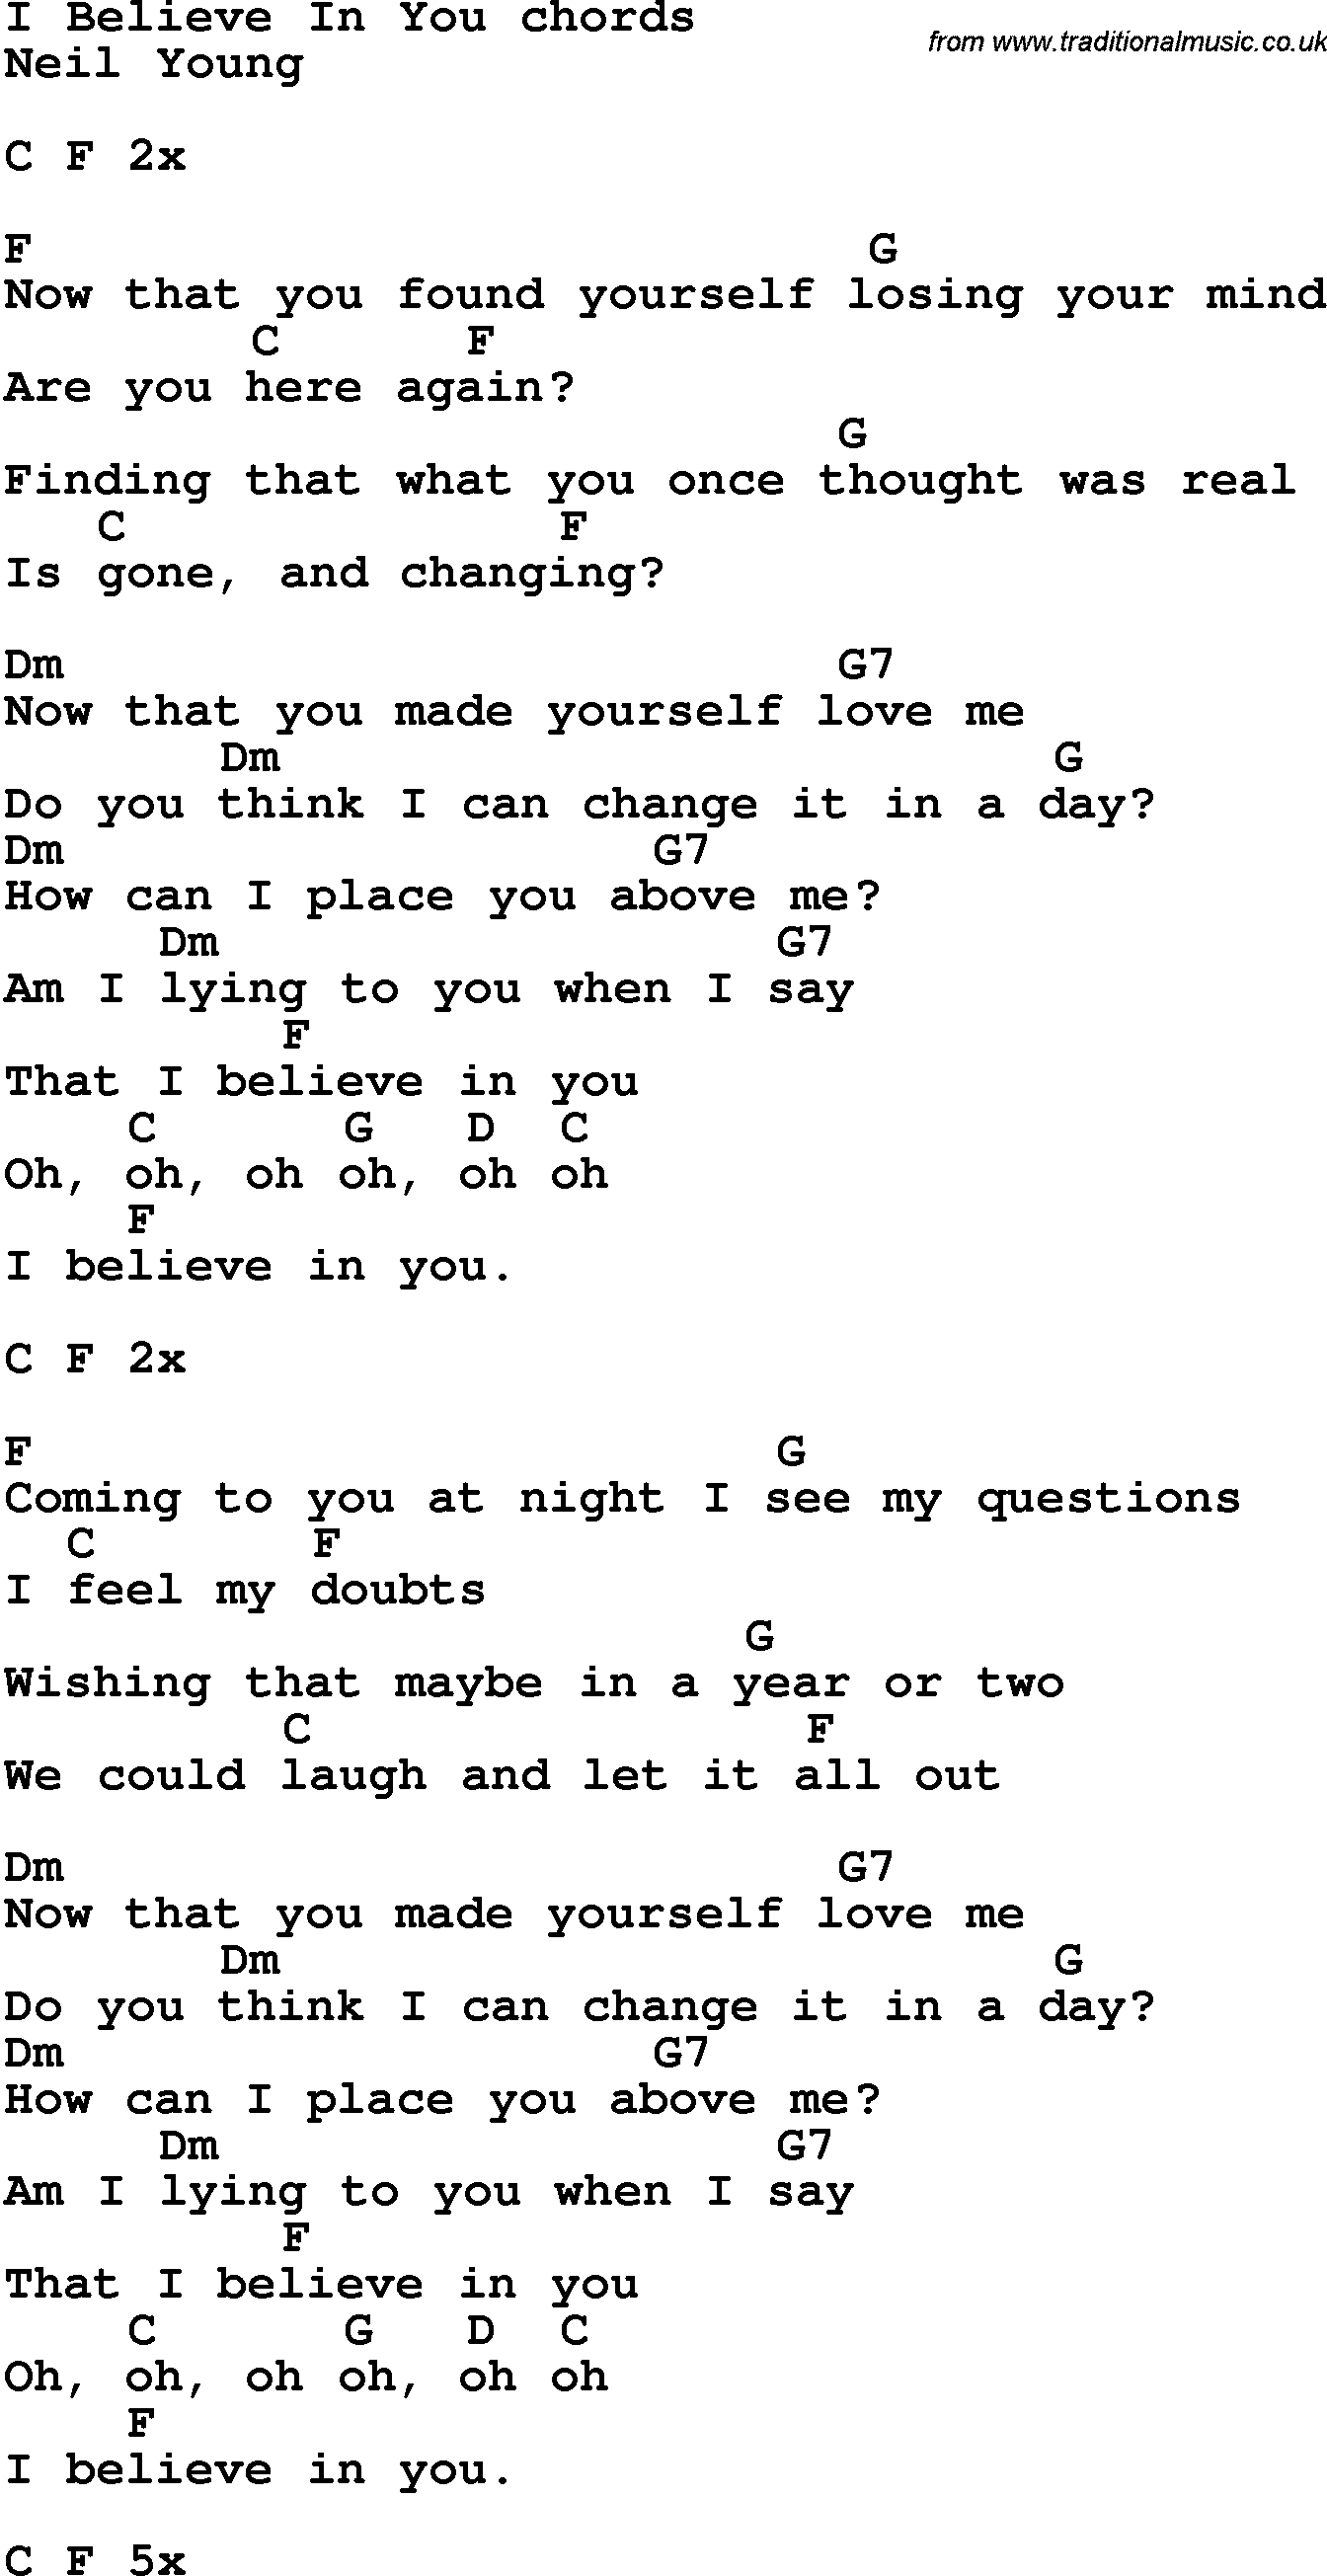 Song Lyrics with guitar chords for I Believe In You - Neil Young